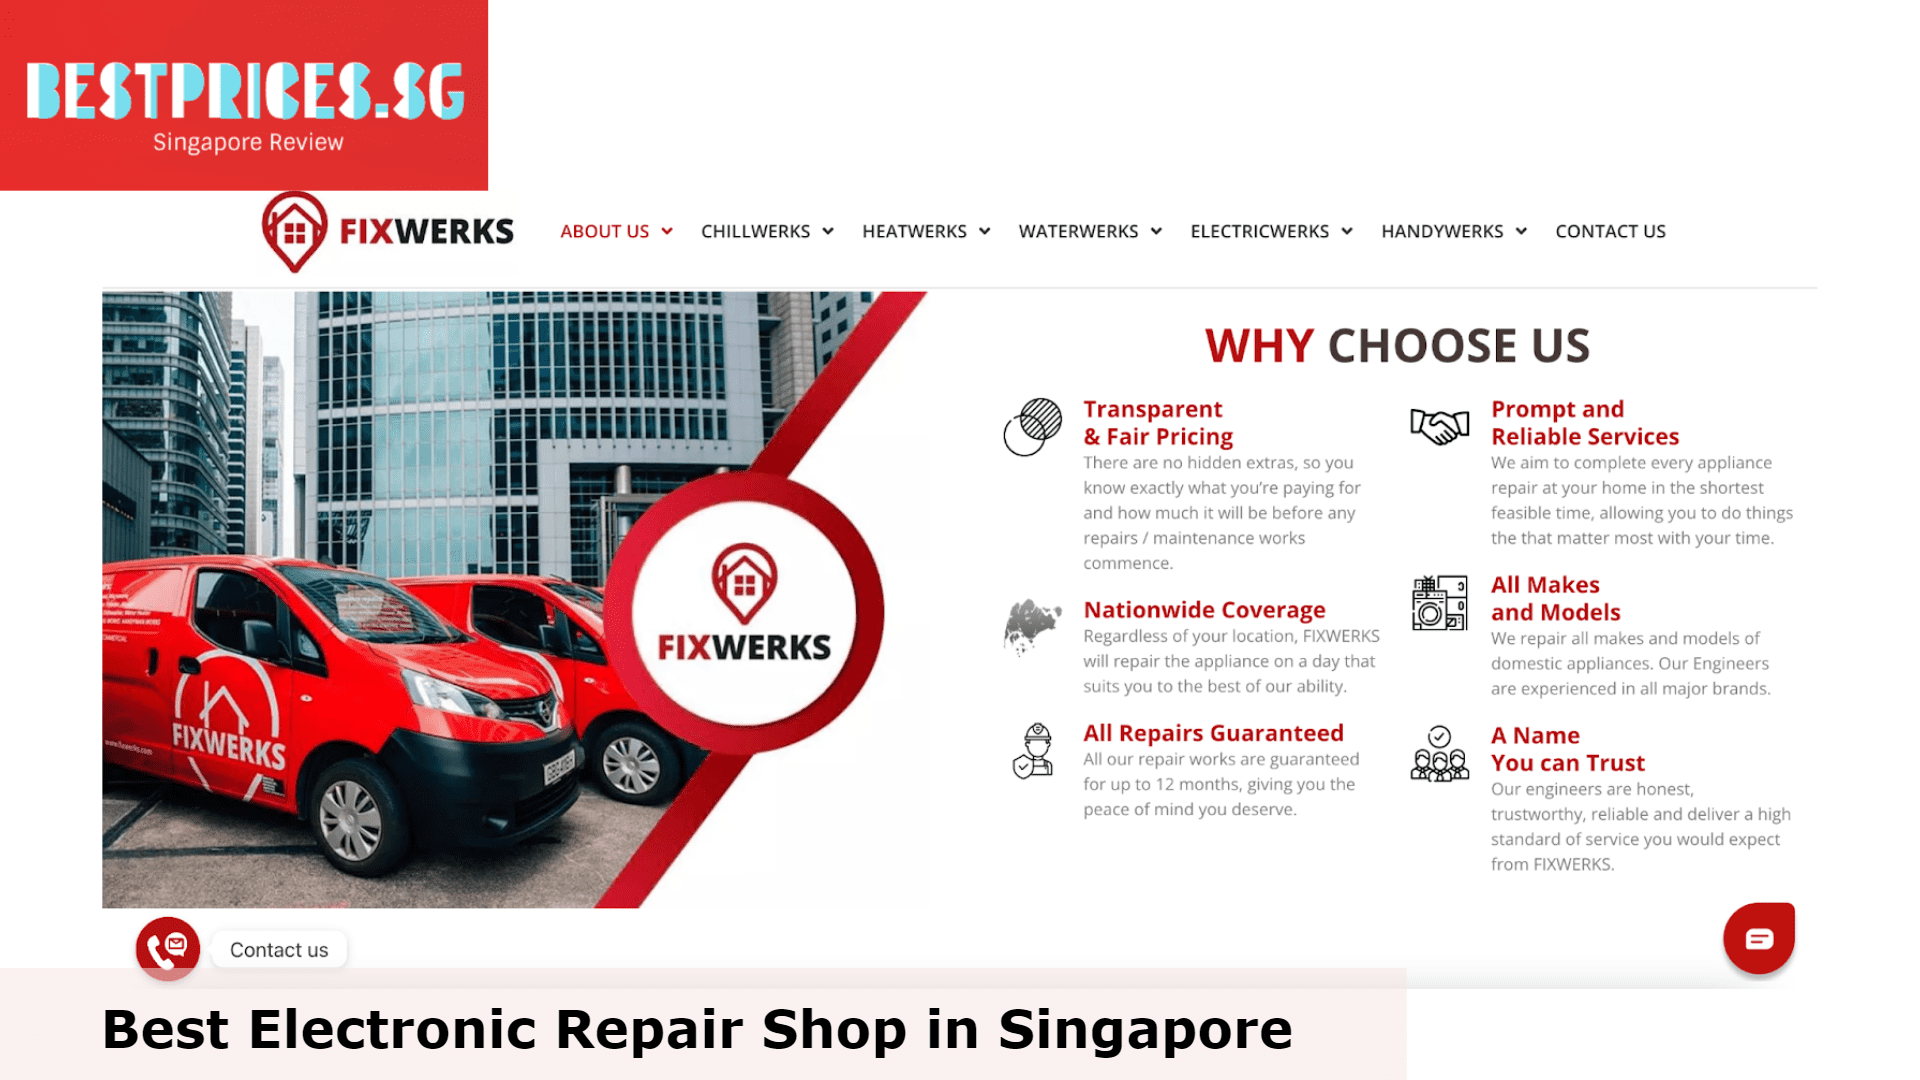 Fixwerks - Electronic Repair Shop Singapore, Electronic Repair Shop Singapore, electronic repair shop near me, small electrical appliance repair singapore, electrical appliance repair shop near me, community repair shop, blender repair service near me, repair workshop, repairman singapore, yeobuild home repair review, Appliance Repair in Singapore, Is it worth it to fix an appliance?, How do you troubleshoot an appliance?, 